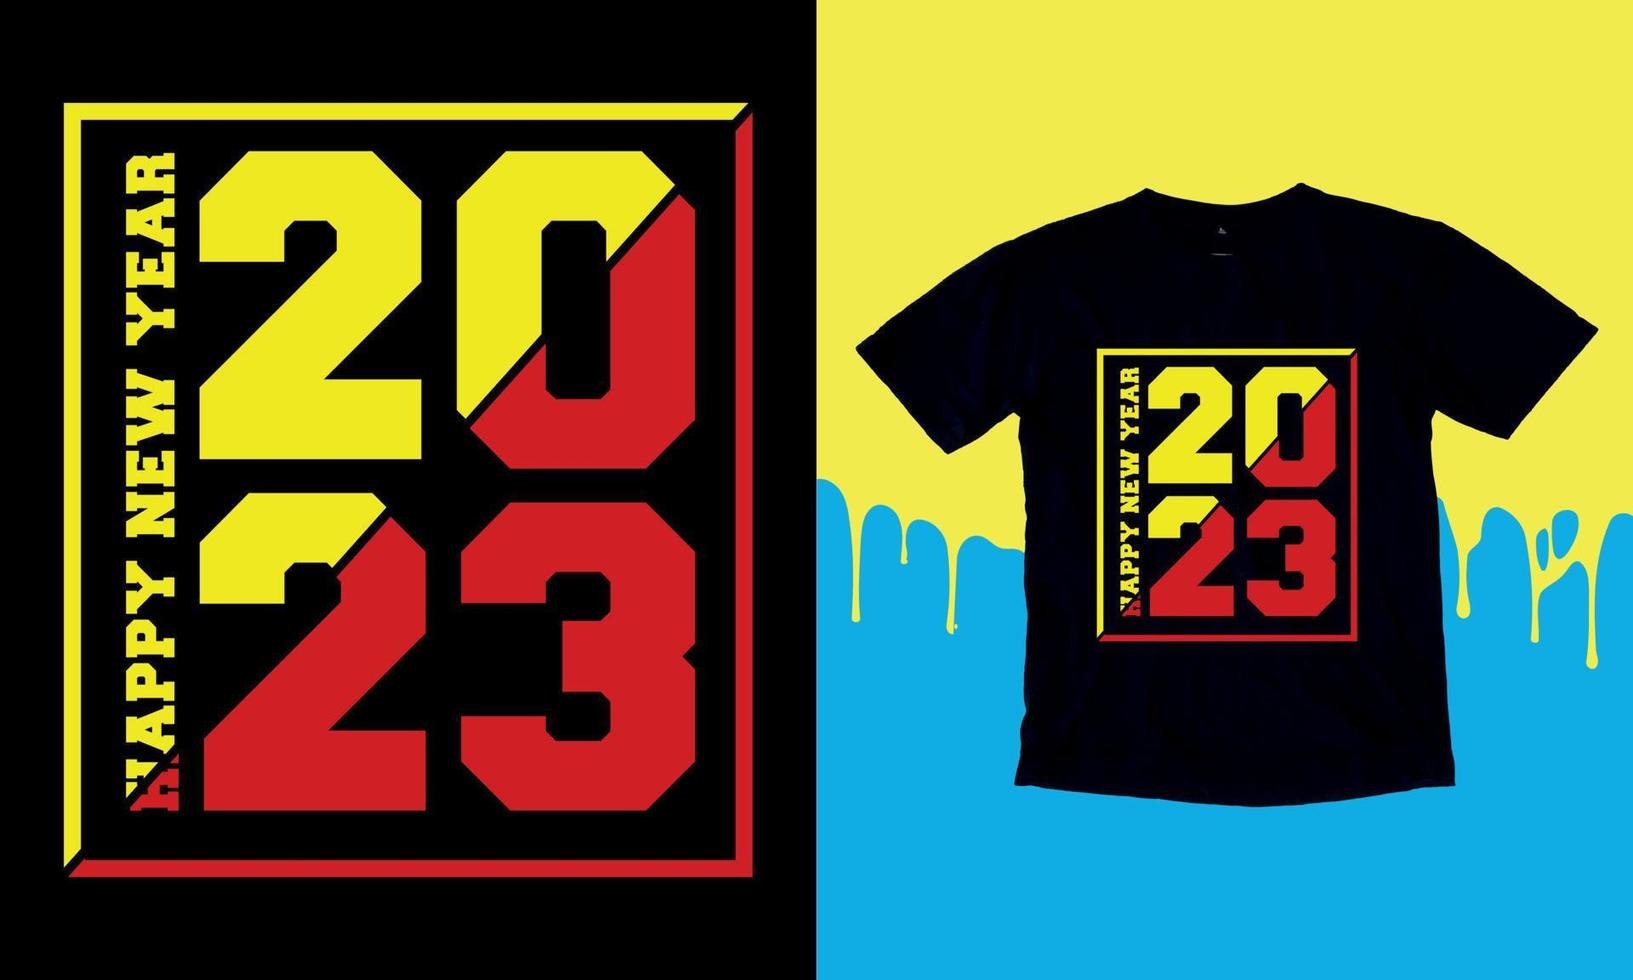 Happy New Welcome 2023, Typography, Vector design template. Unique eye catching t-shirt Design.